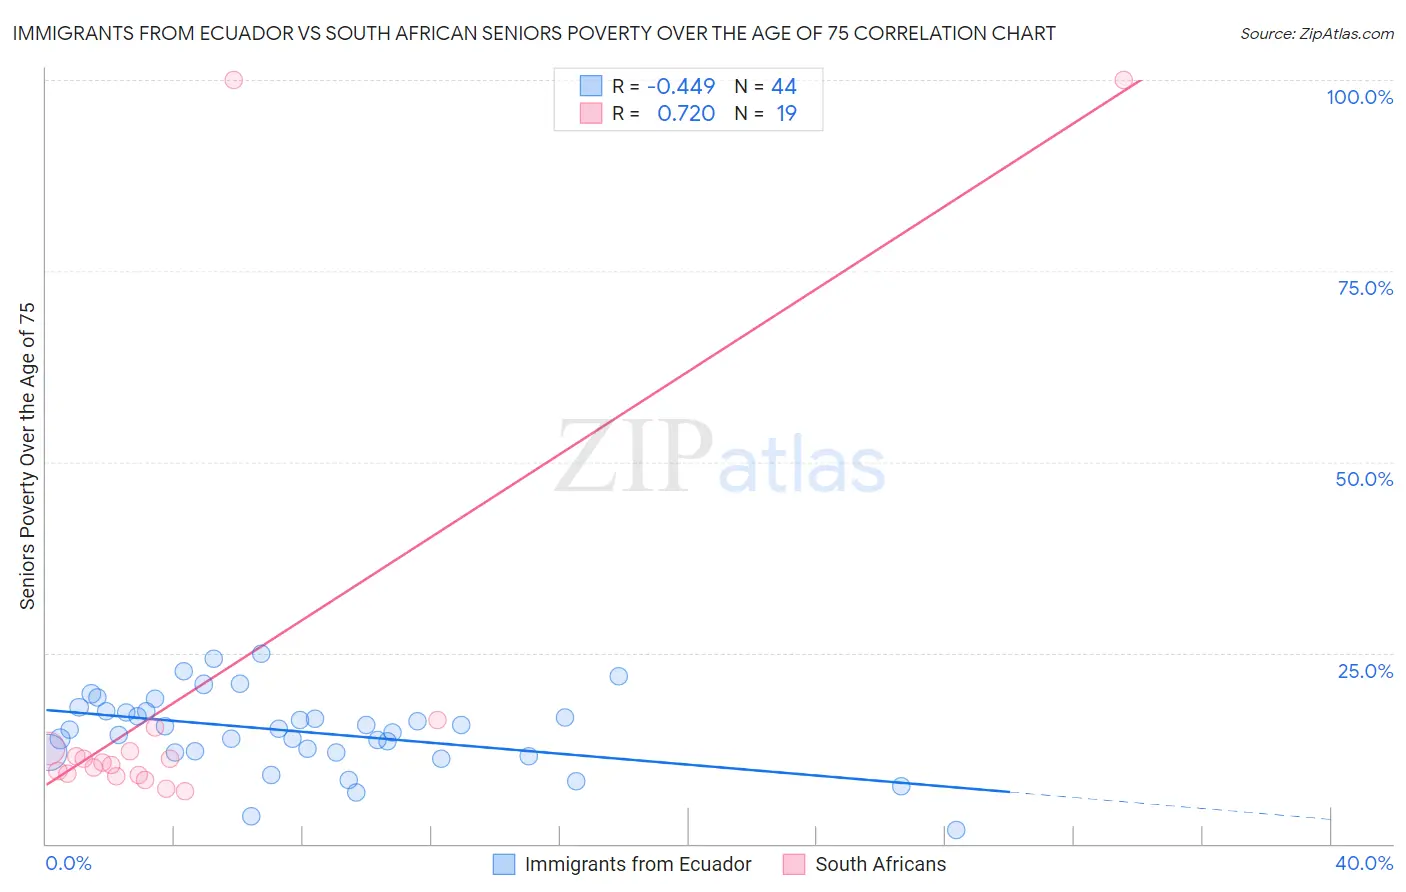 Immigrants from Ecuador vs South African Seniors Poverty Over the Age of 75